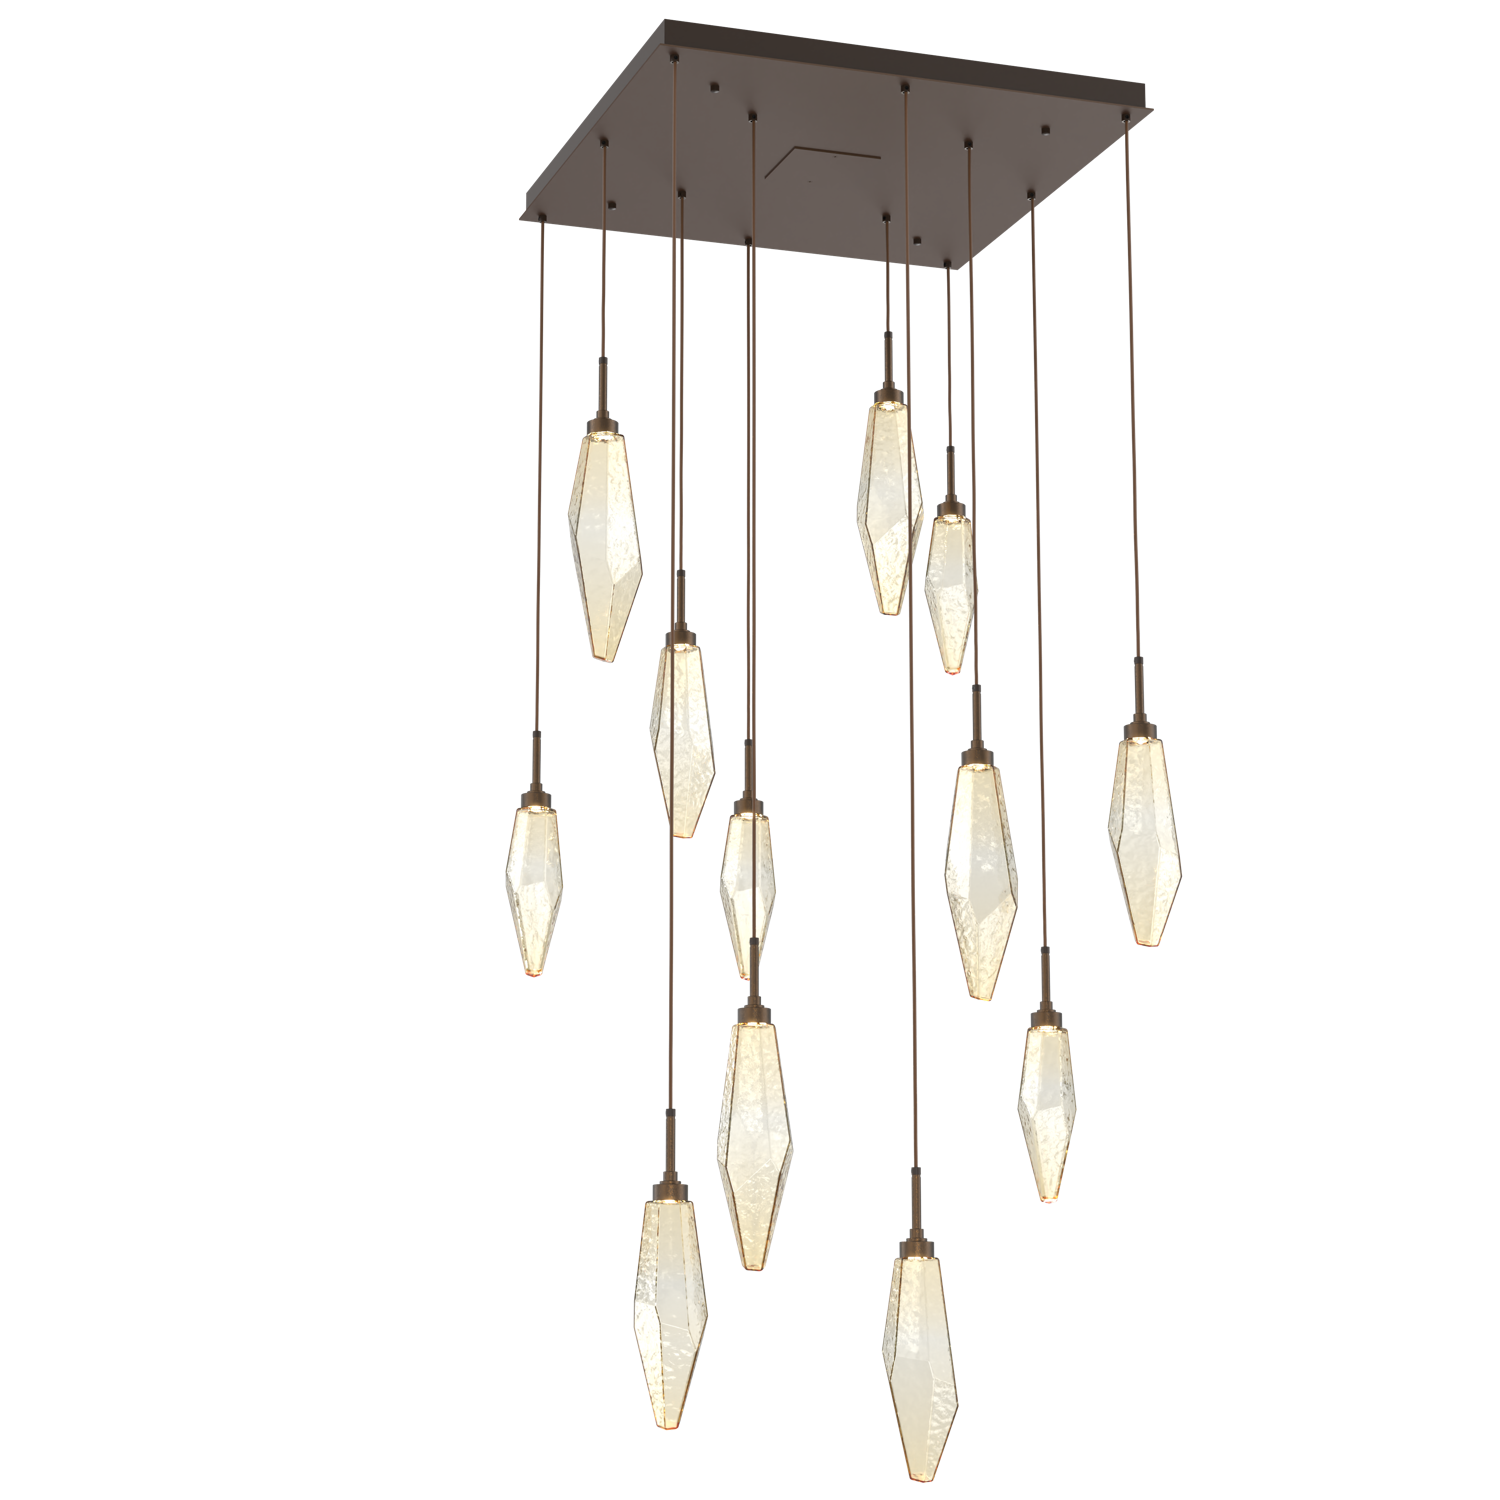 CHB0050-12-FB-CA-Hammerton-Studio-Rock-Crystal-12-light-square-pendant-chandelier-with-flat-bronze-finish-and-chilled-amber-blown-glass-shades-and-LED-lamping